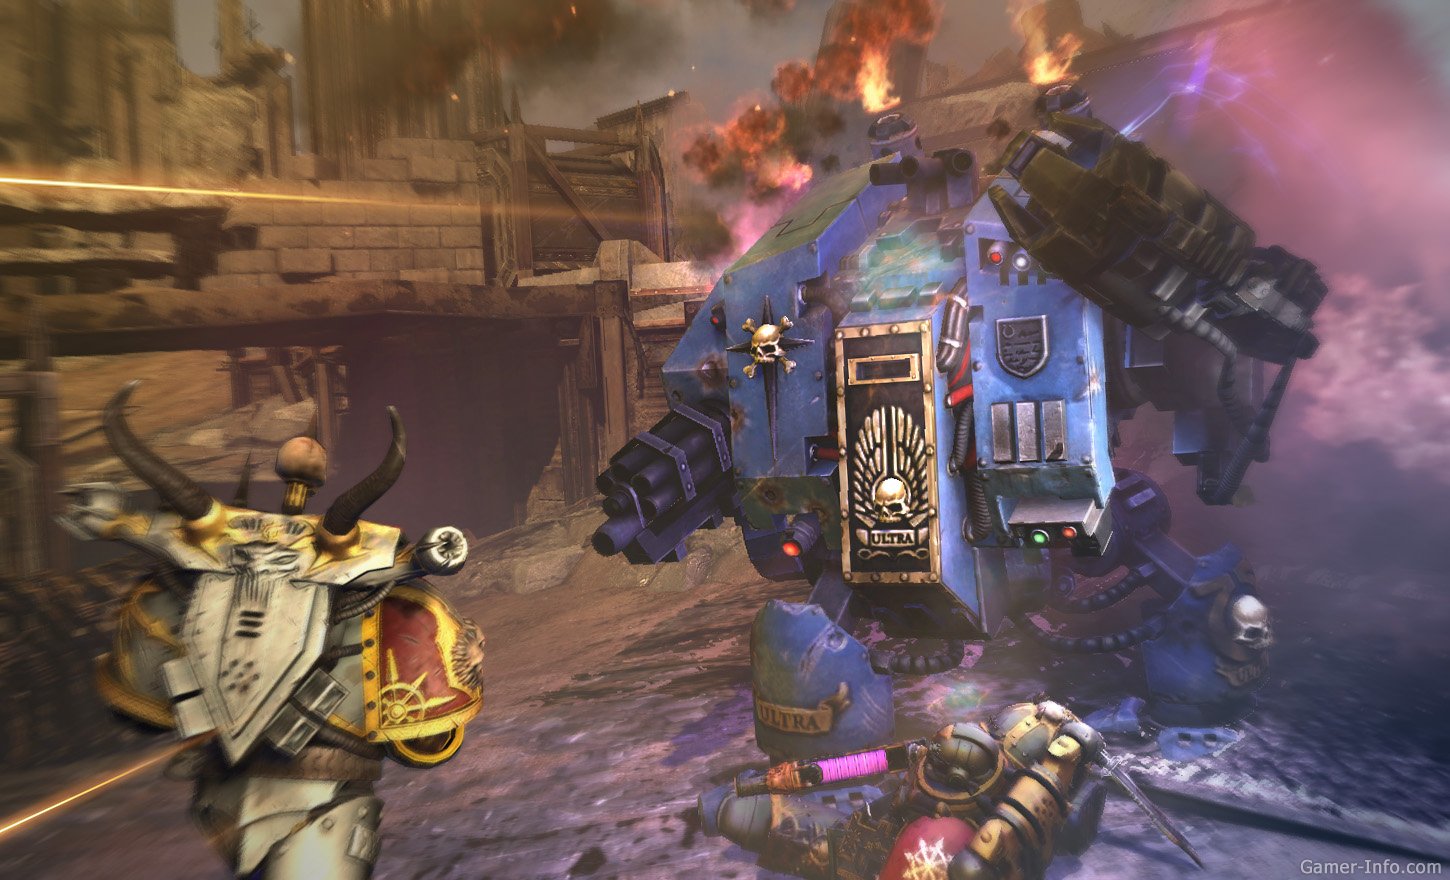 instal the last version for ios Warhammer 40,000: Space Marine 2